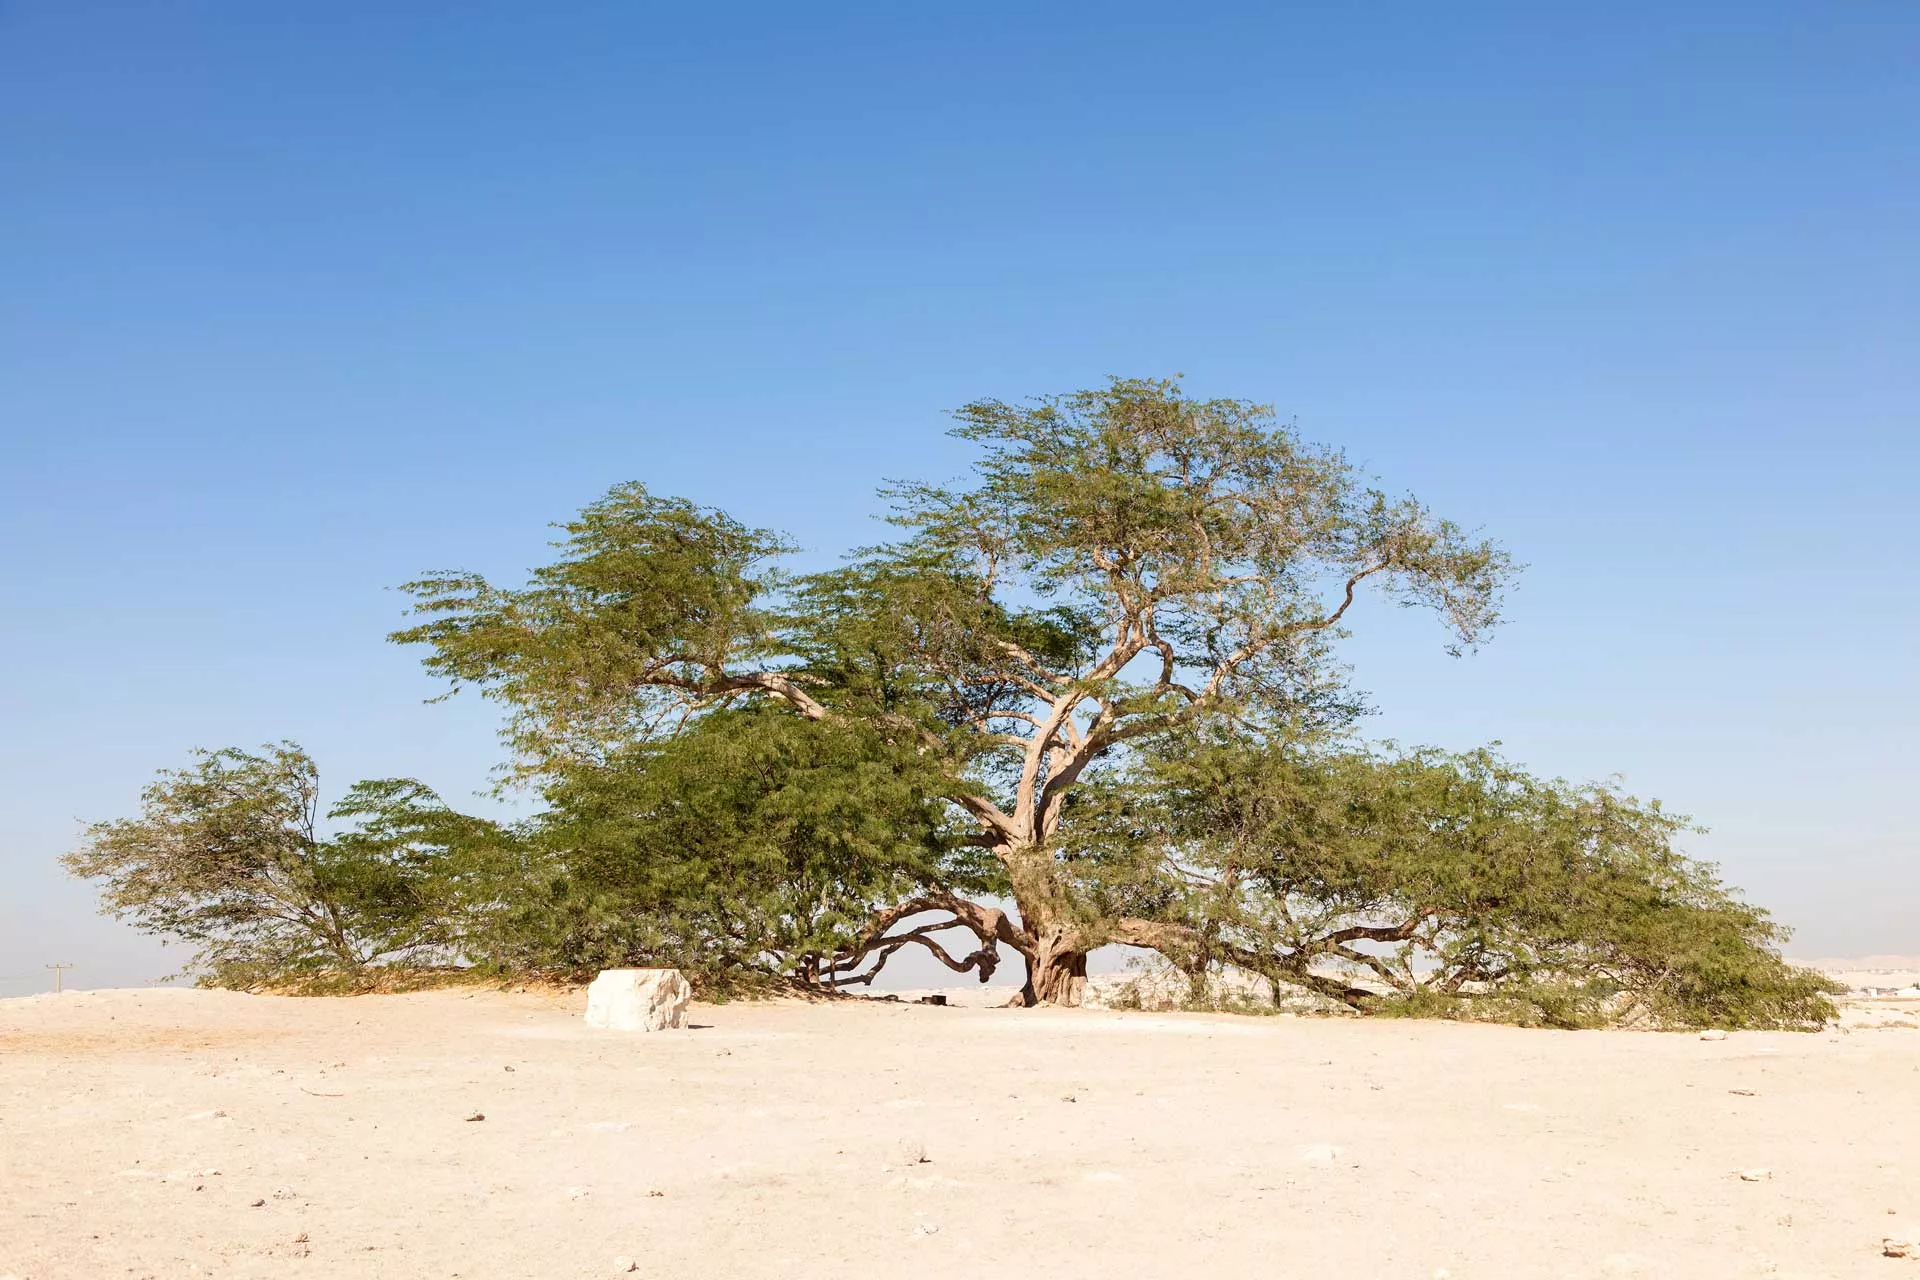 Tree of Life in Bahrain, Middle East | Nature Reserves,Deserts - Rated 4